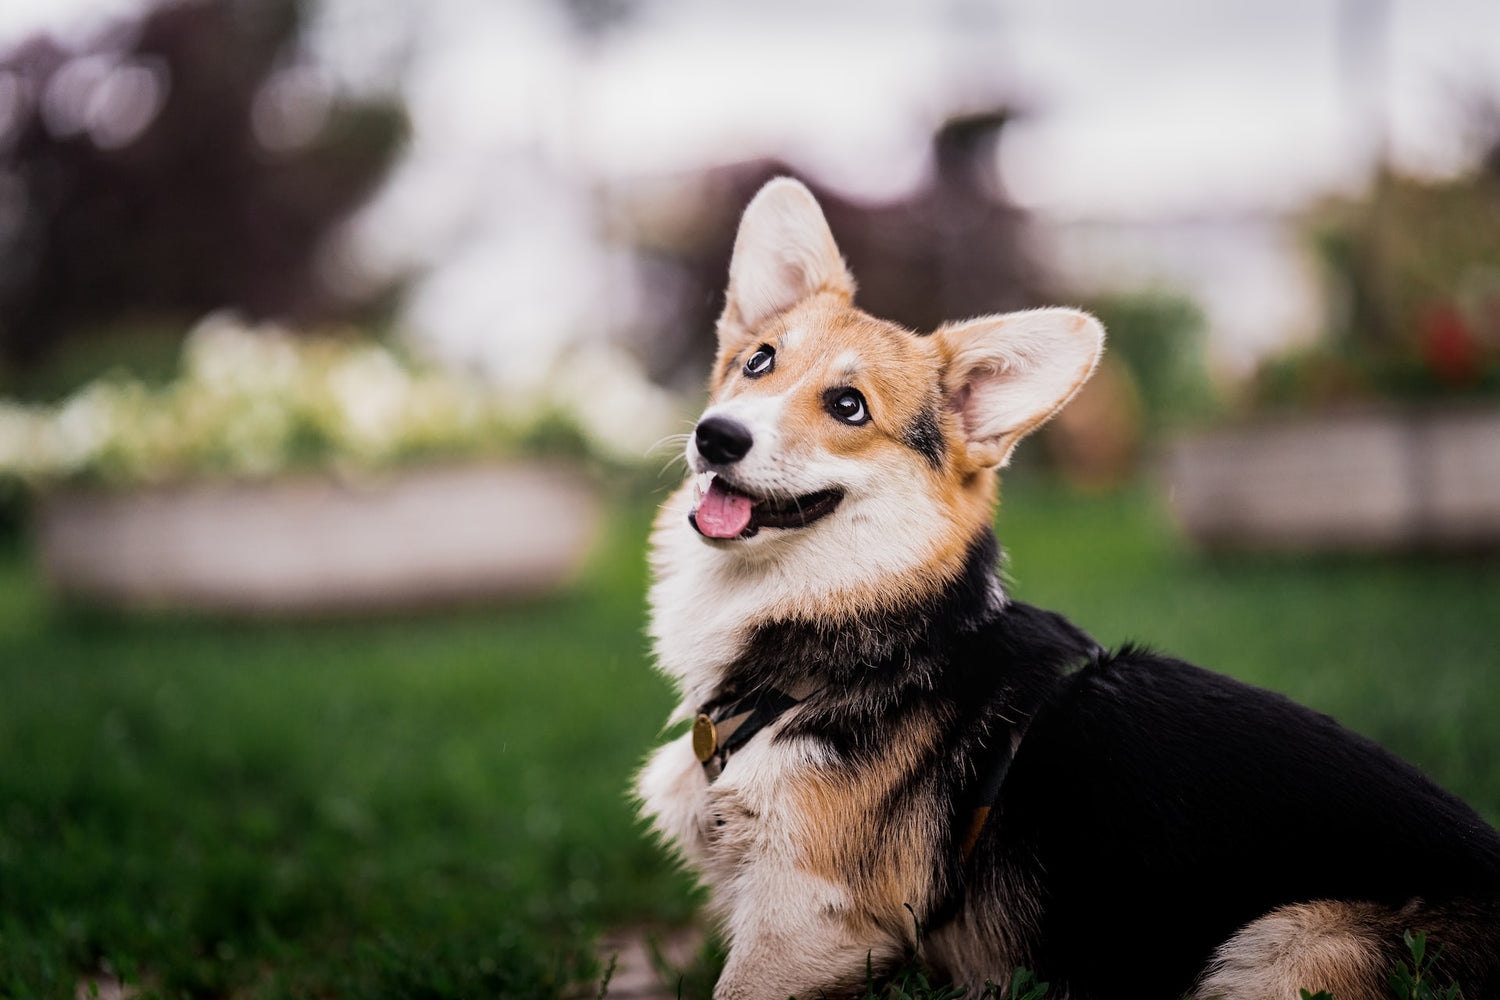 Corgi: Most Common Problems And How to Prevent Them